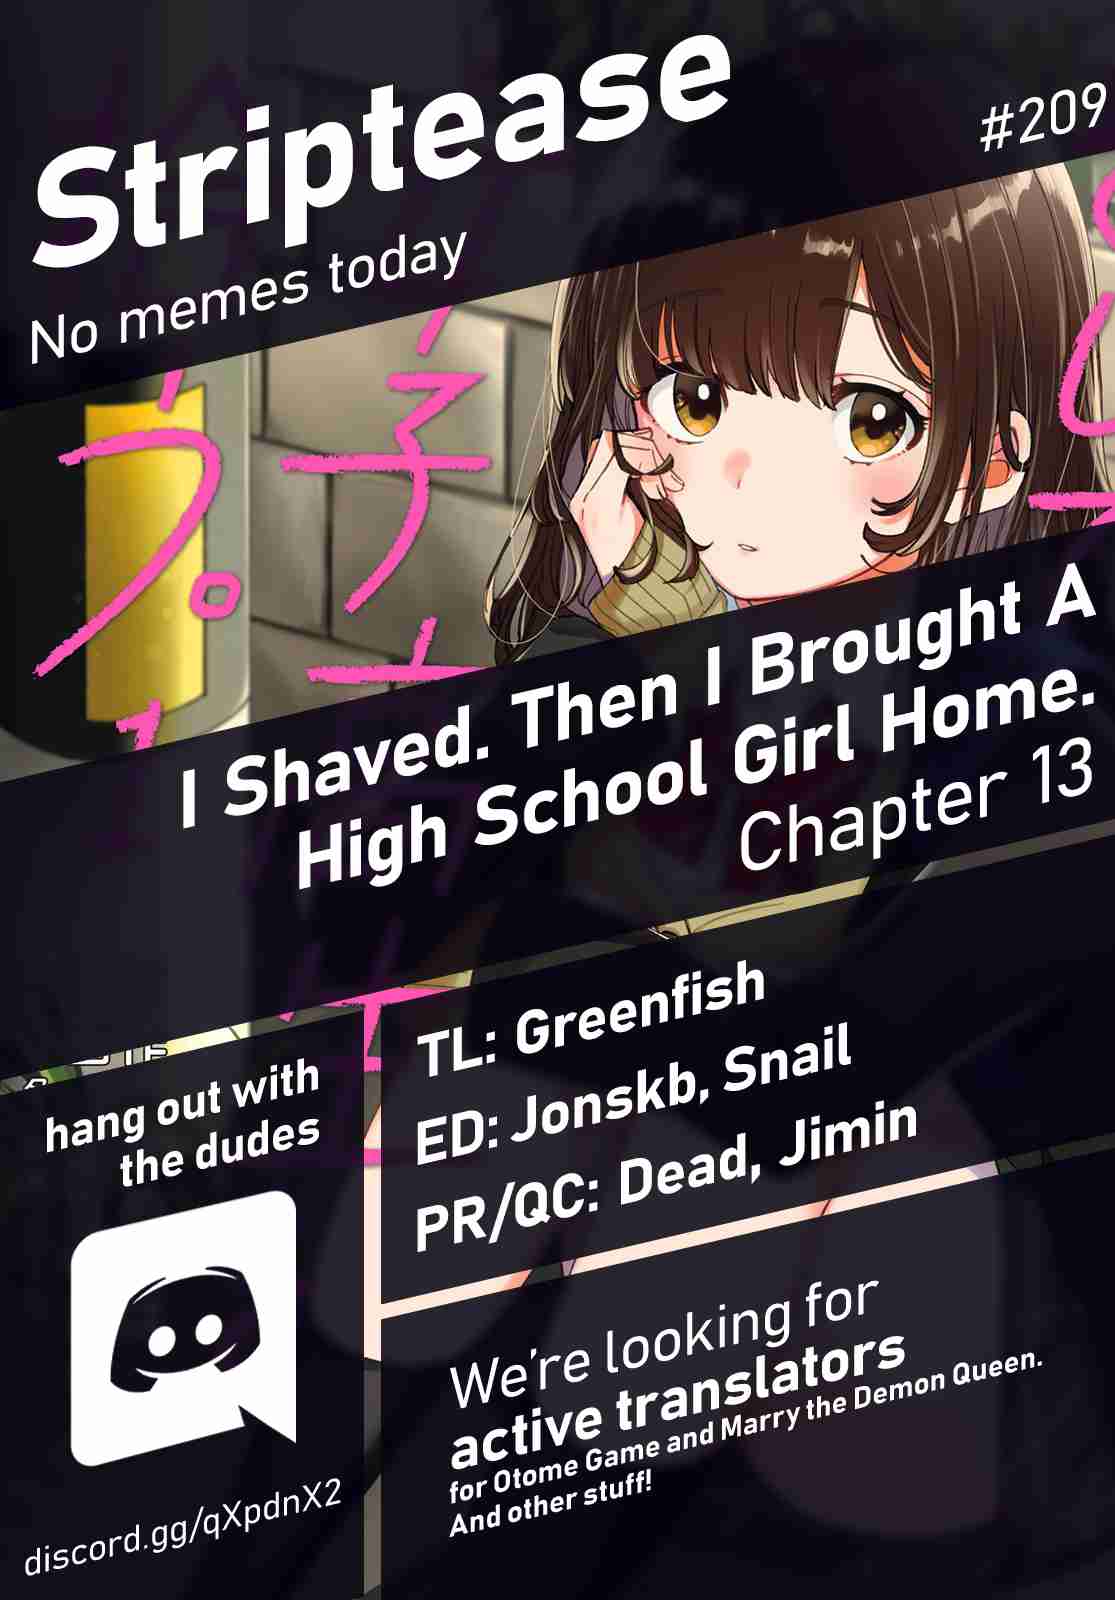 I Shaved. Then I Brought a High School Girl Home. Ch. 13